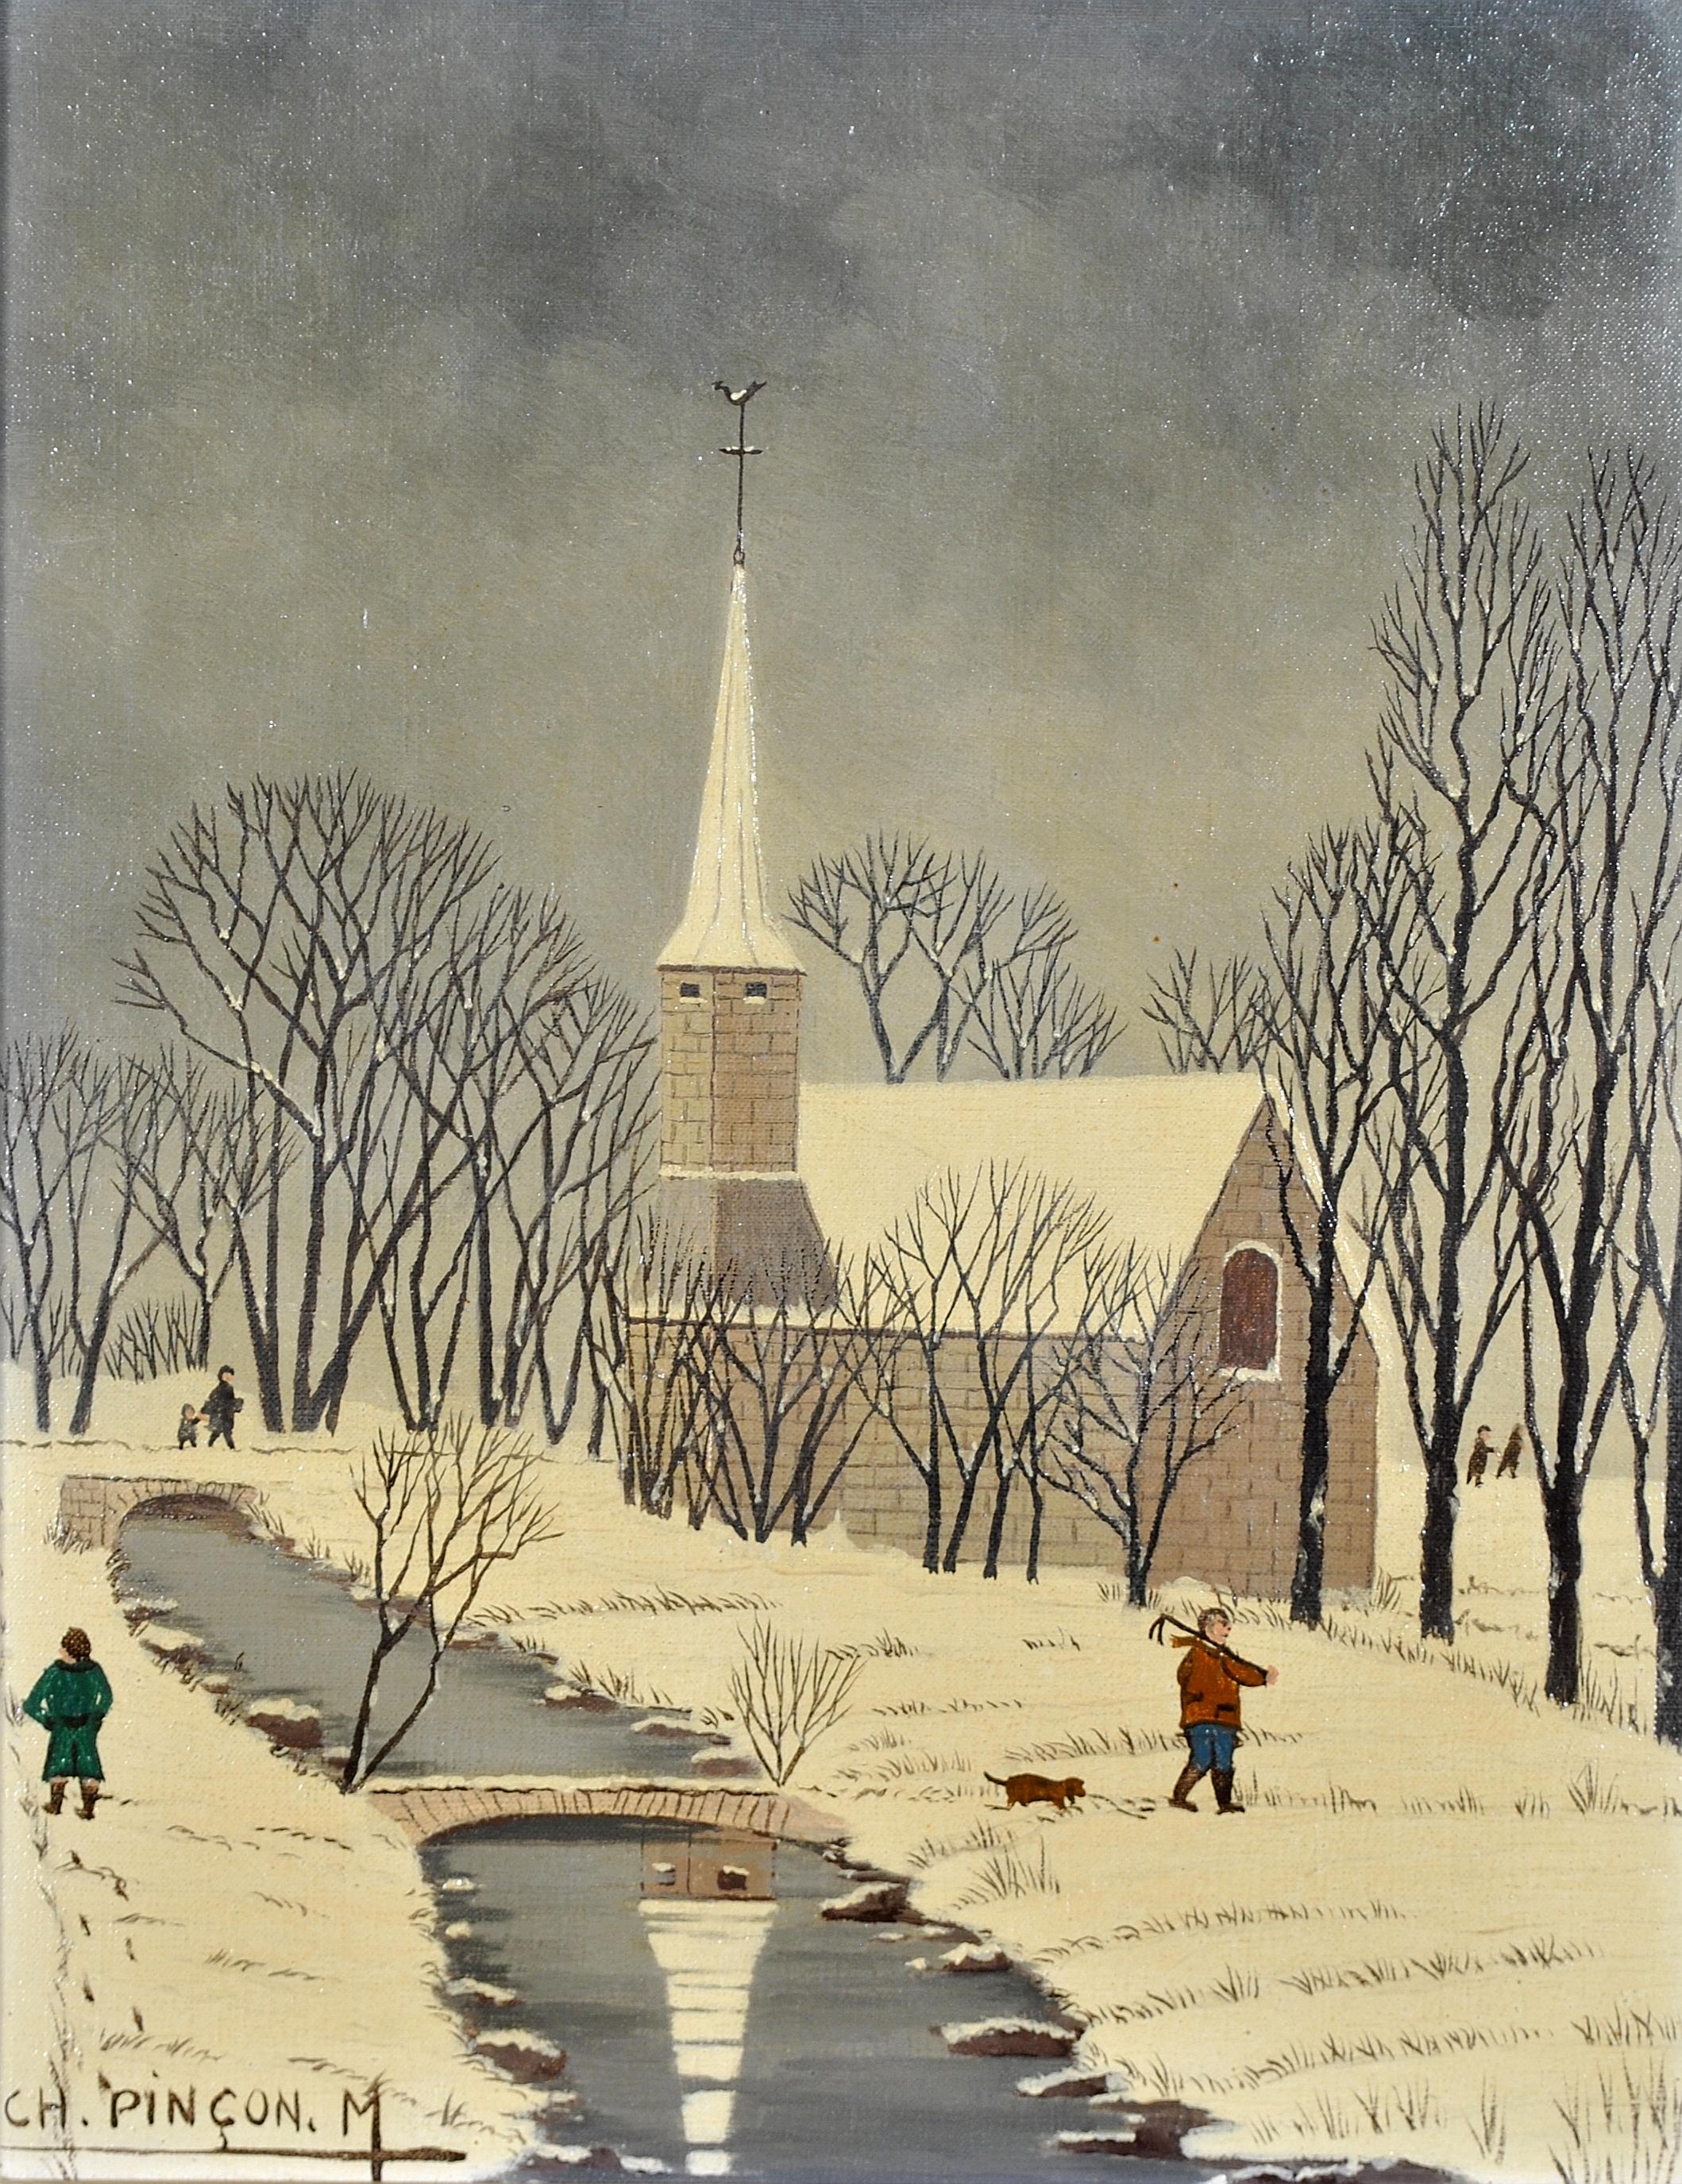 A beautiful mid 20th century French naif oil on canvas winter landscape by Charles Pincon-Maricourt. The artist is featured in Anatole Jakovsky's ''Peintres Naifs'', which is known as the bible of 20th century French naif painters.

The work depicts